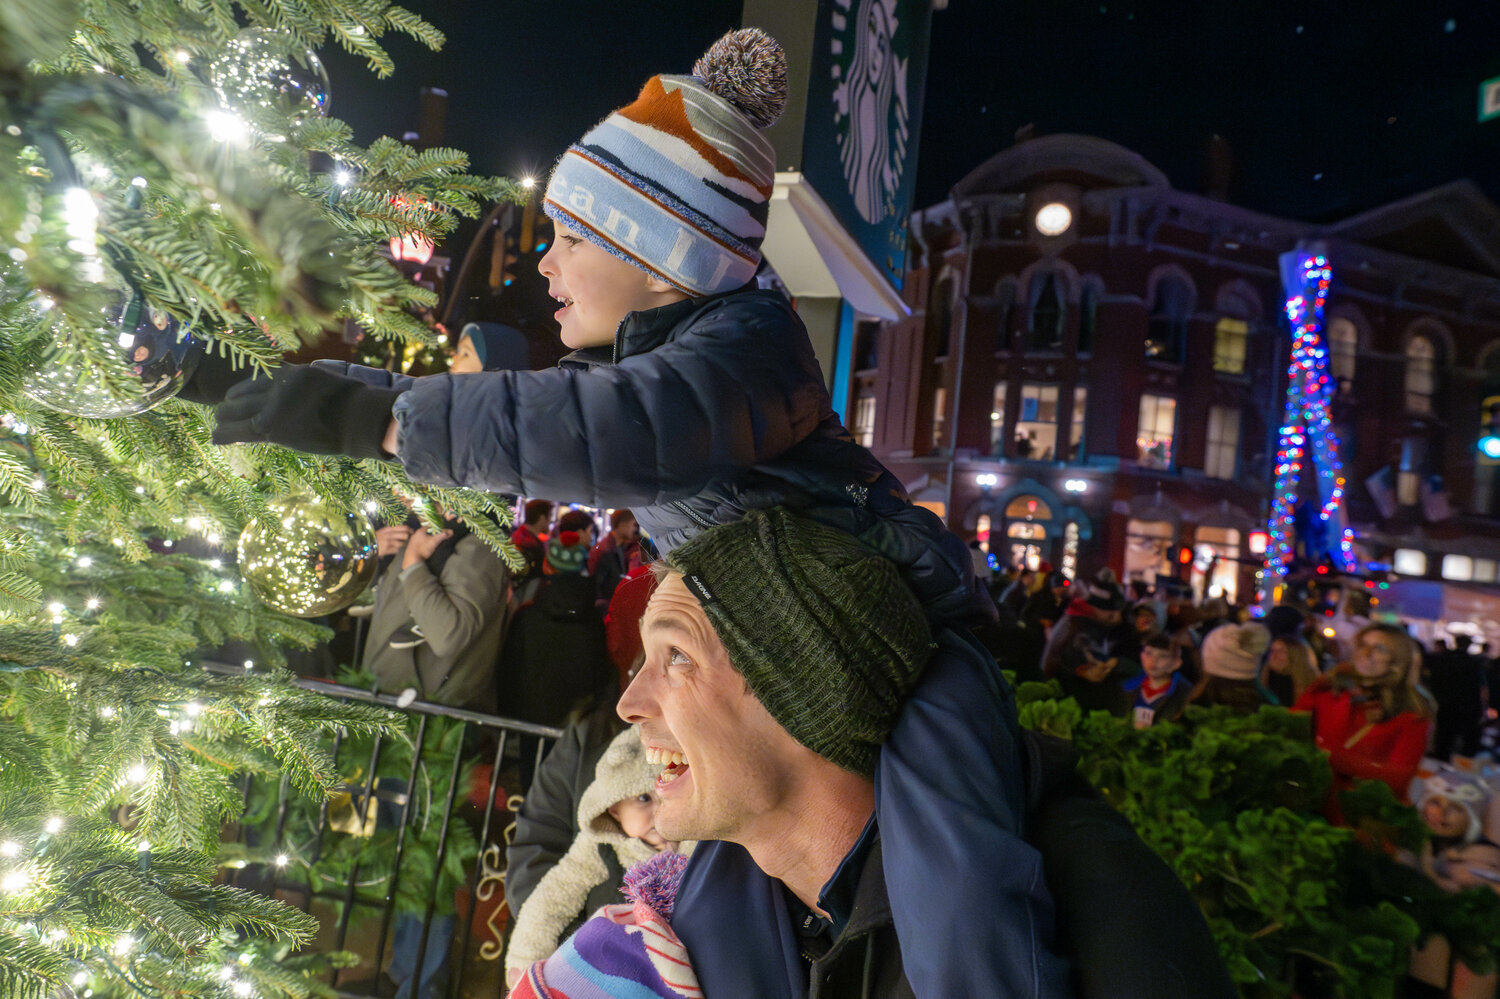 Dan Piasecki and son Liam Piasecki enjoy viewing the lights on the newly lit Christmas Tree at the Doylestown Borough Christmas Tree Lighting event Friday night.